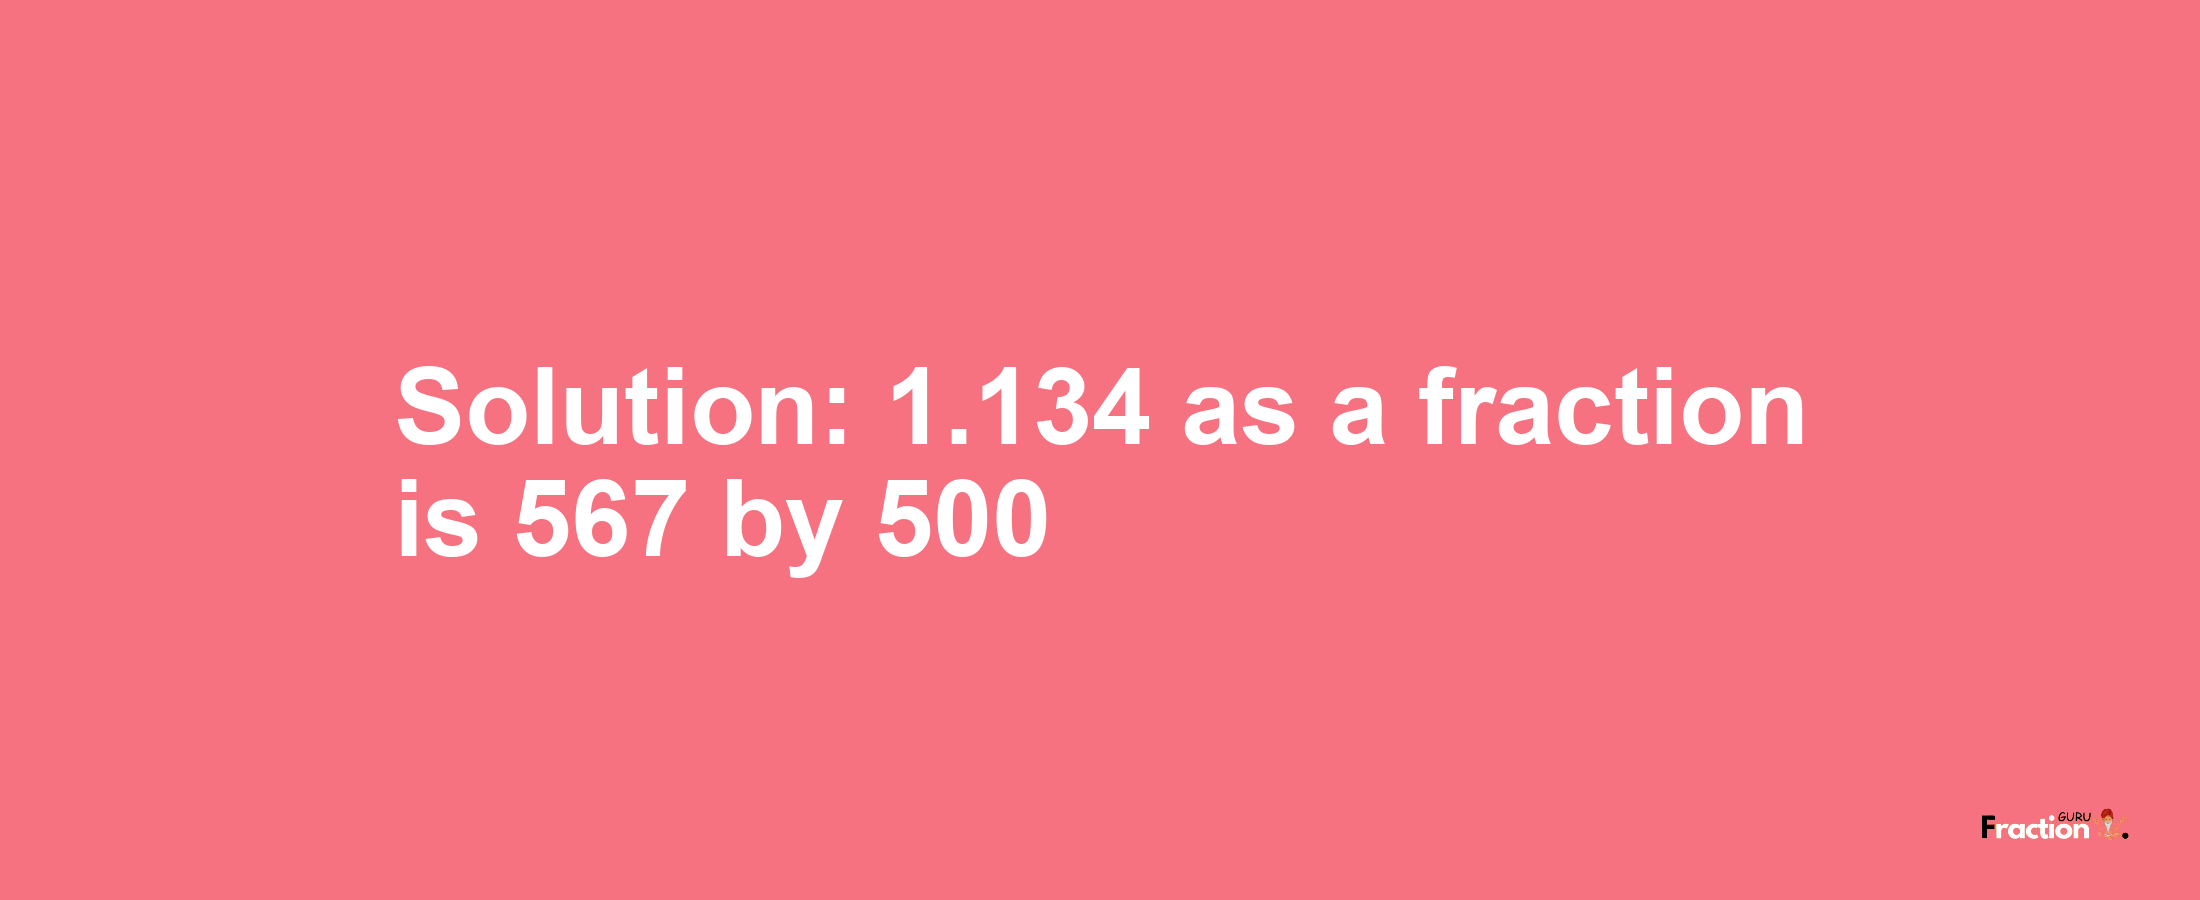 Solution:1.134 as a fraction is 567/500